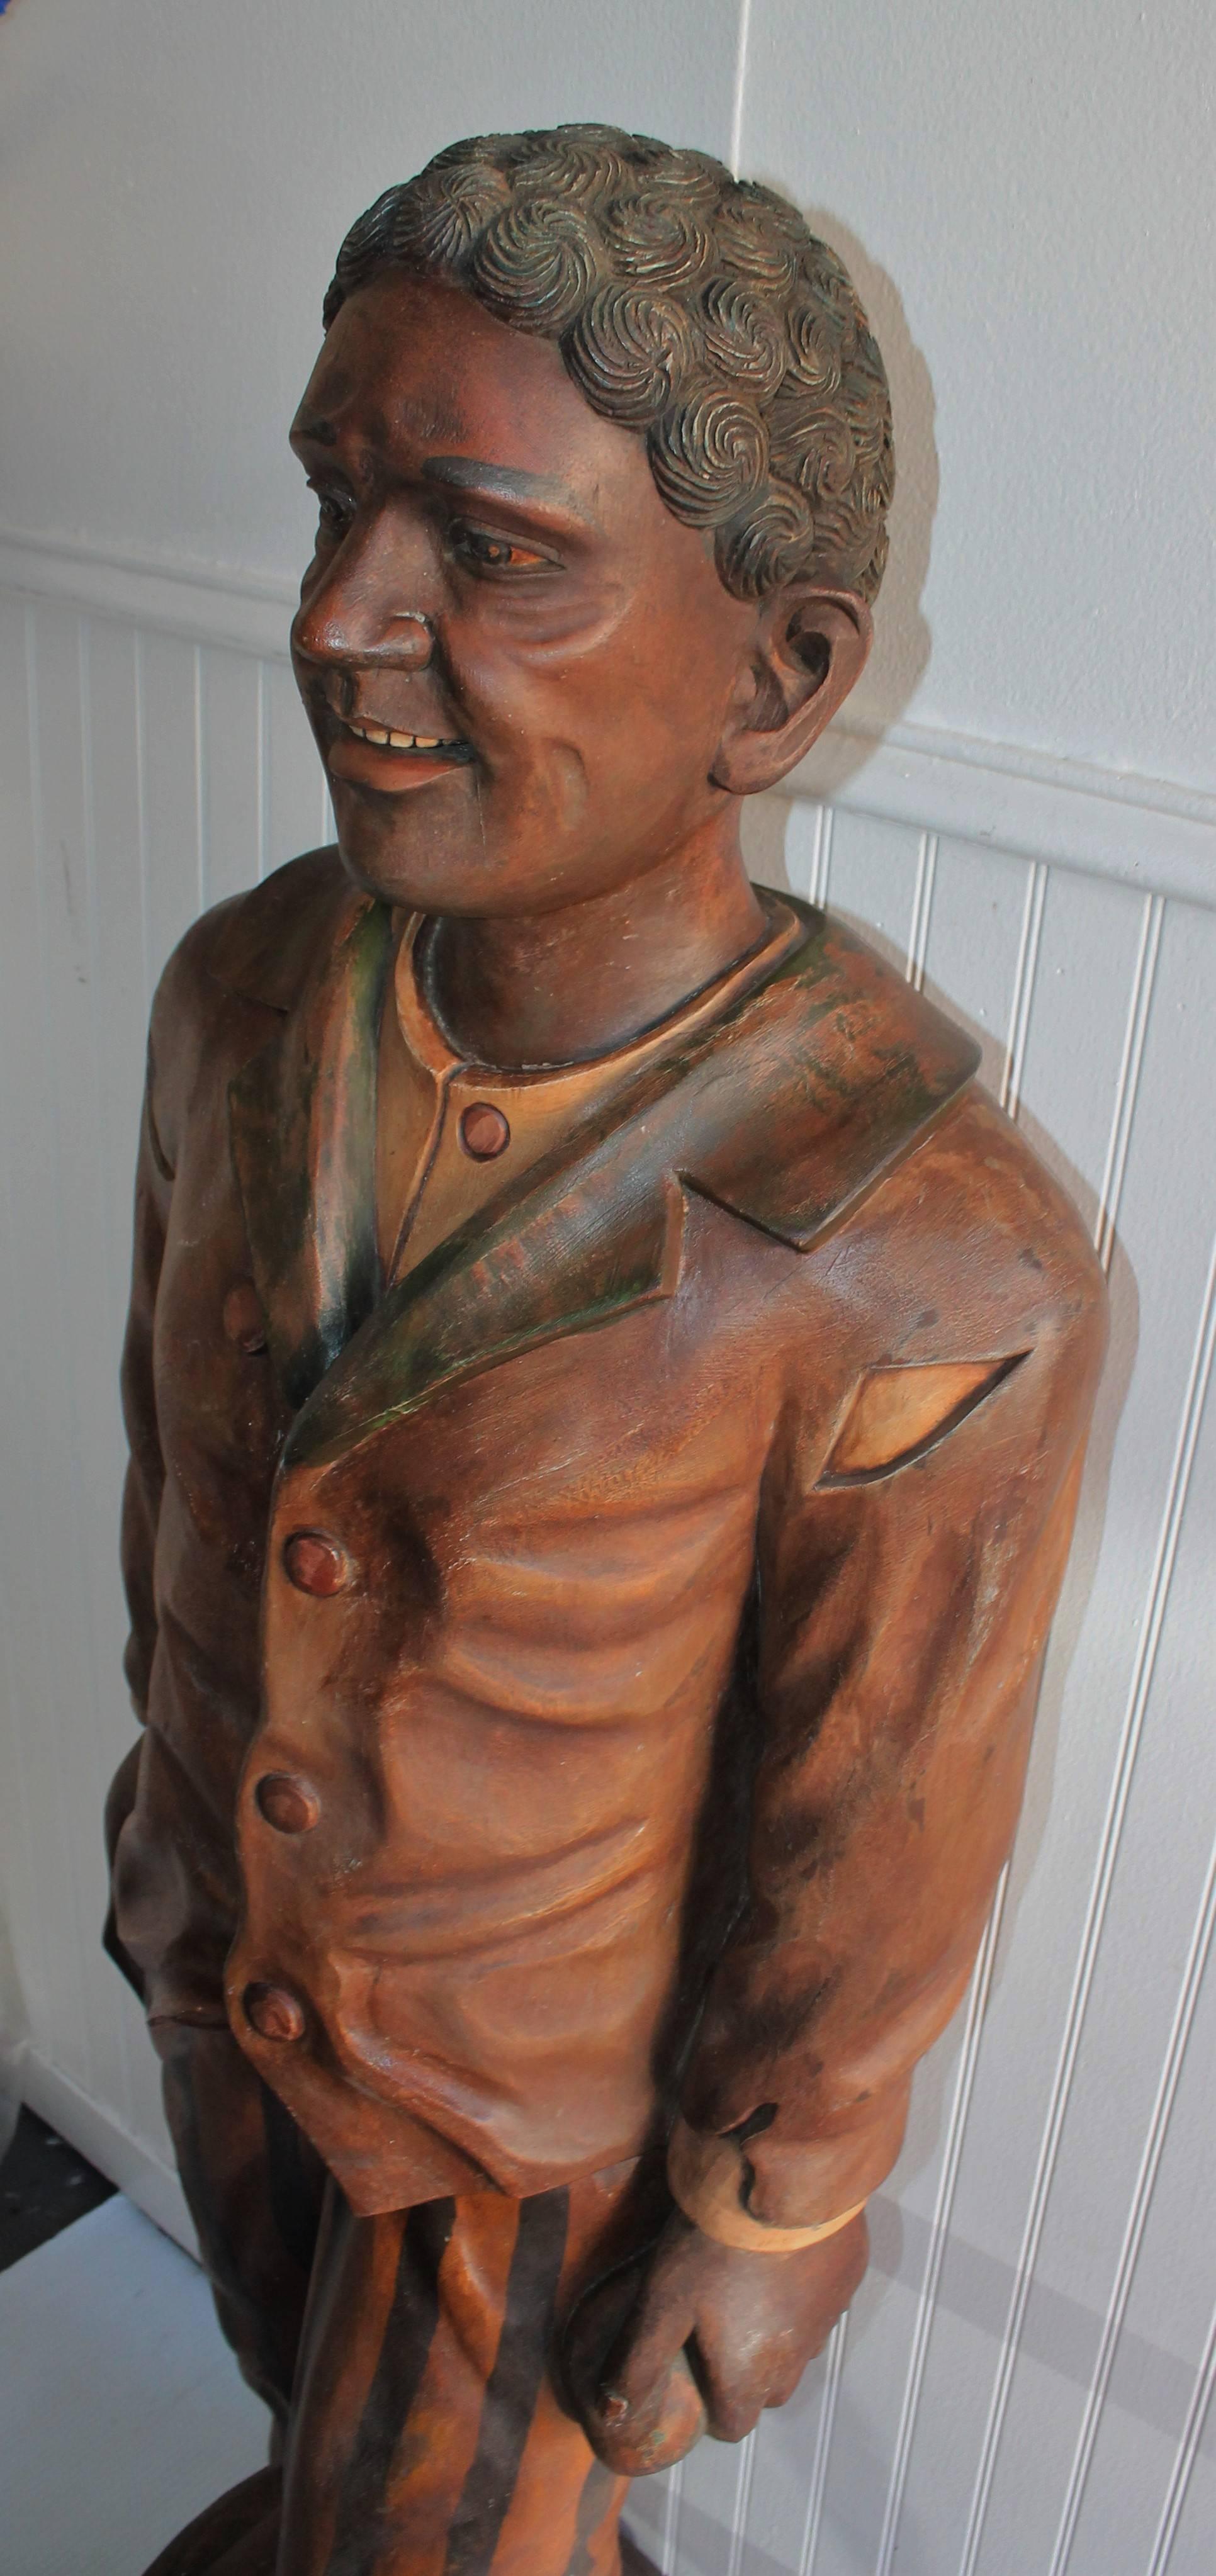 Hand-Carved and Painted 19th Century Cigar Store Figure.
The man is hand carved from one piece of wood. He is probably late 19th century and over painted. The details of the carving is amazing.